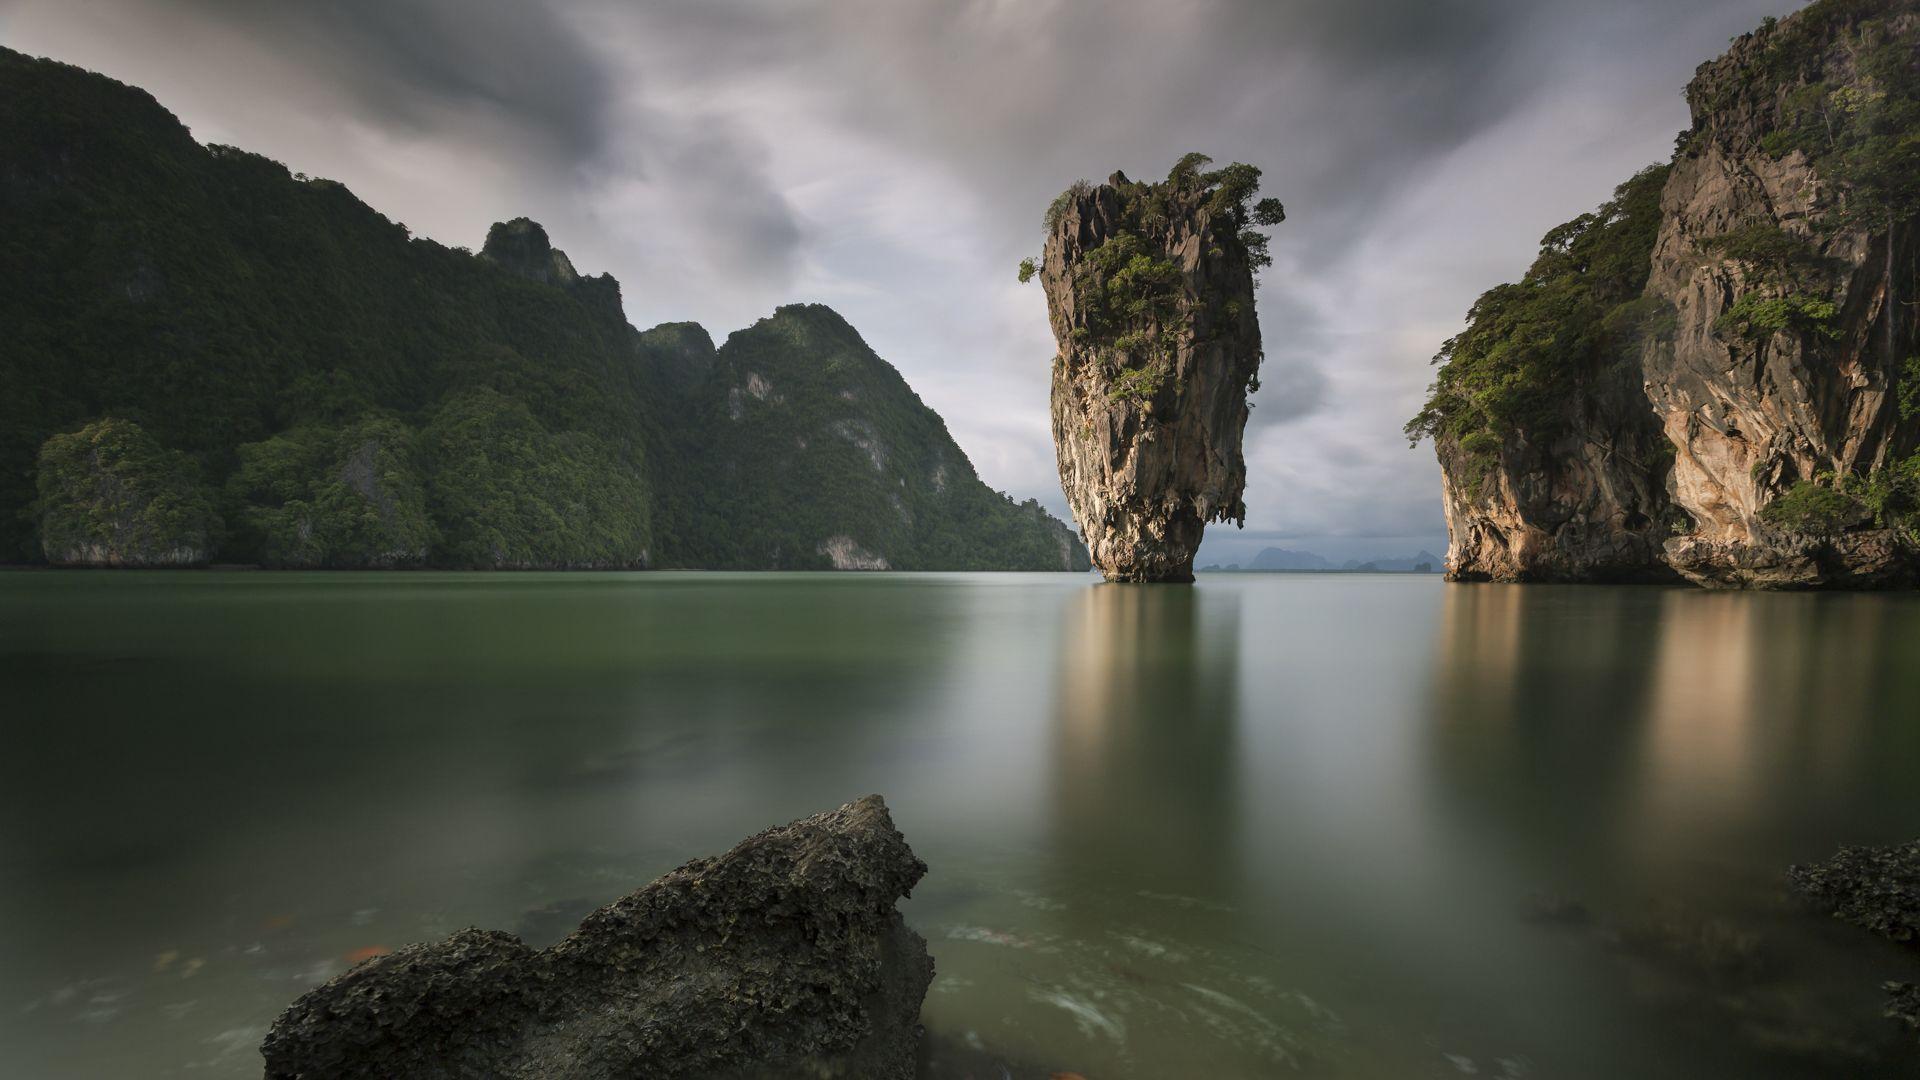 Khao Phing Kan(Island in Thailand), wallpaper